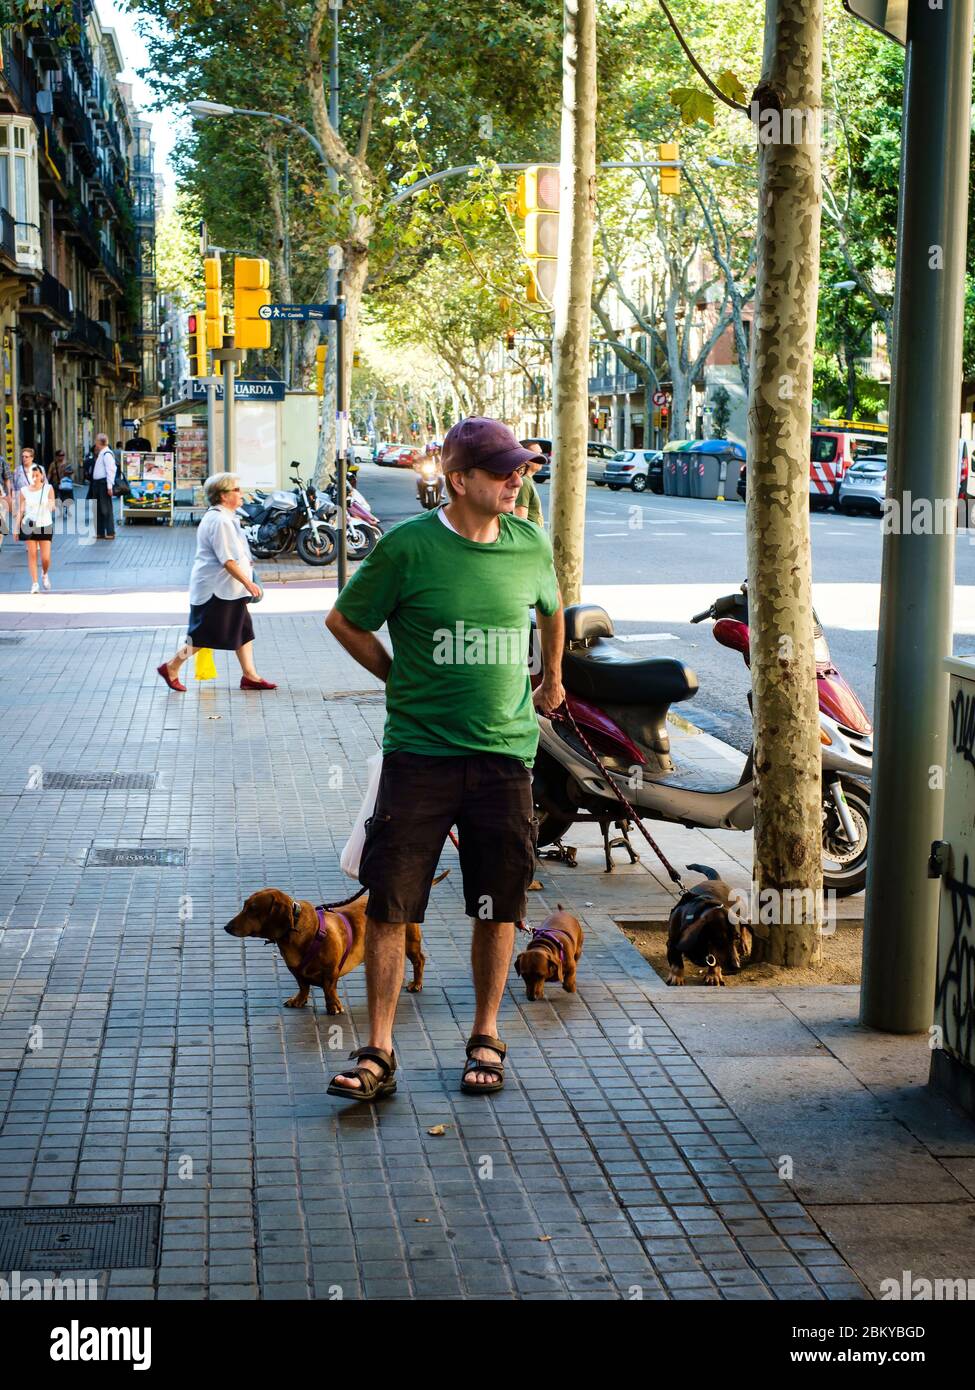 Man walking three dachshunds on the streets of Barcelona. Stock Photo